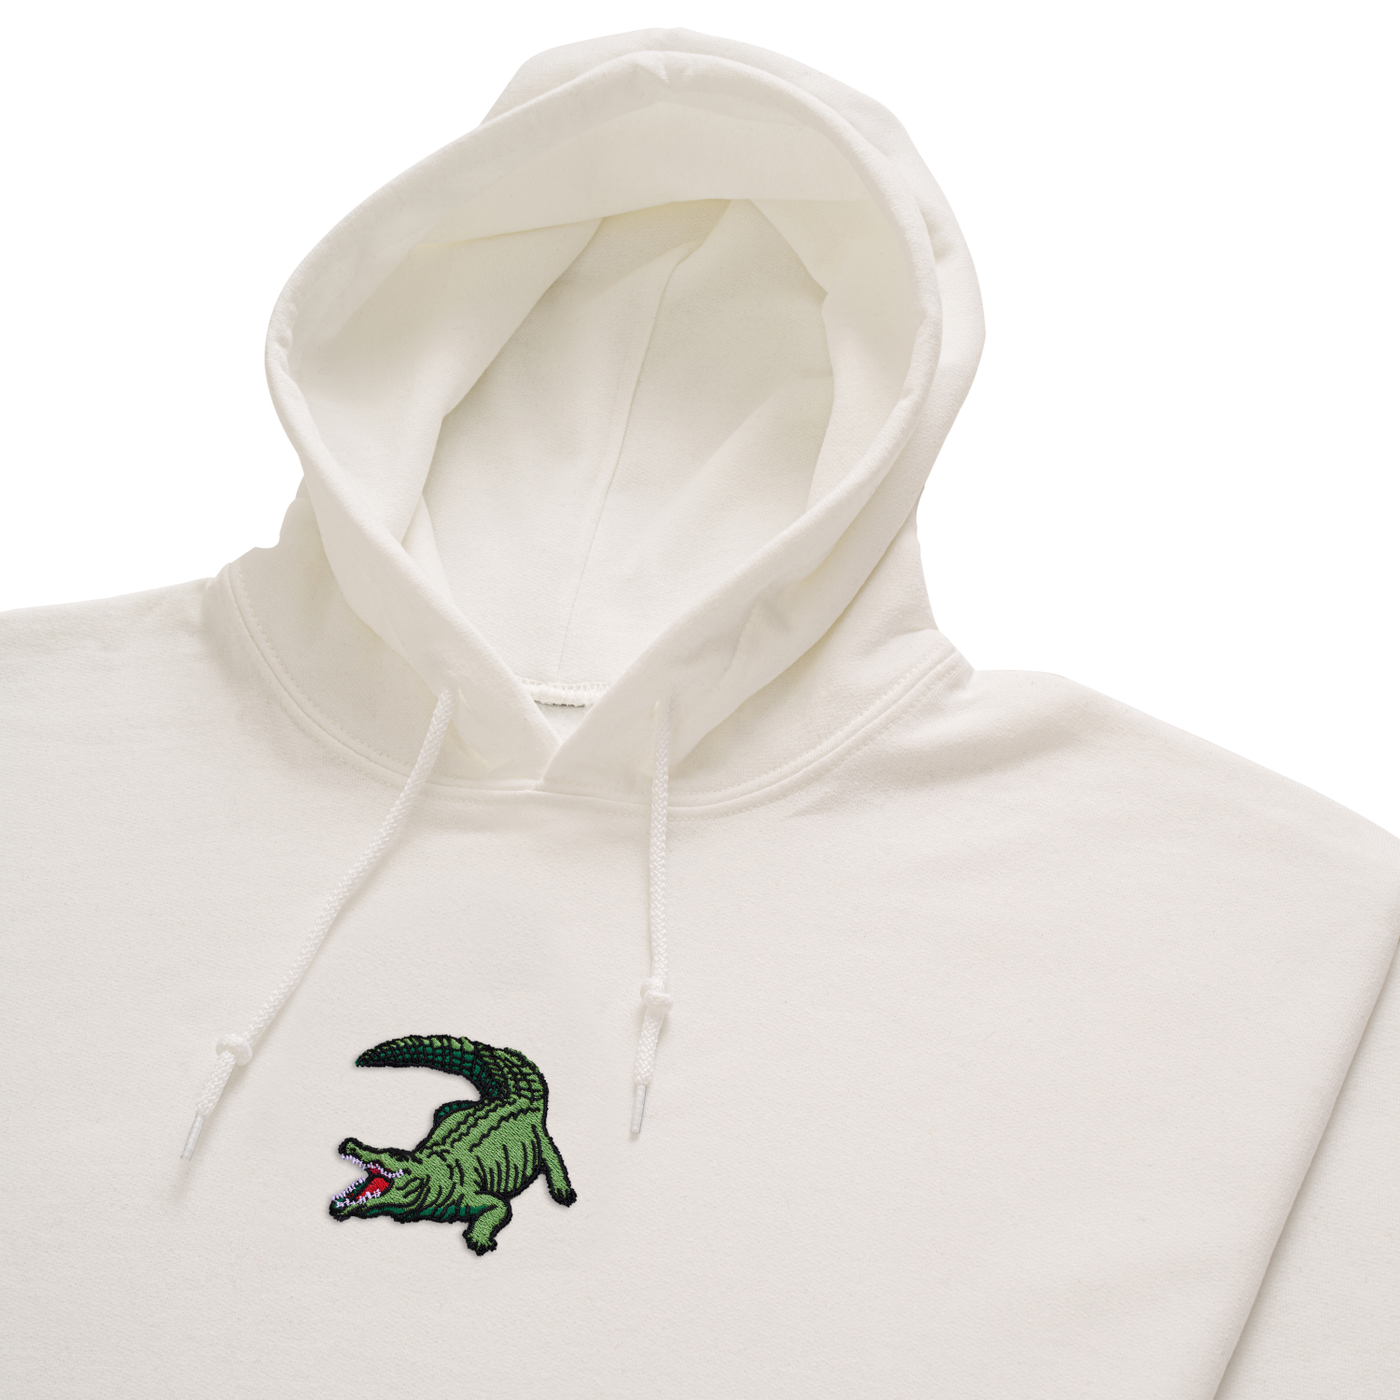 Bobby's Planet Men's Embroidered Saltwater Crocodile Hoodie from Australia Down Under Animals Collection in White Color#color_white